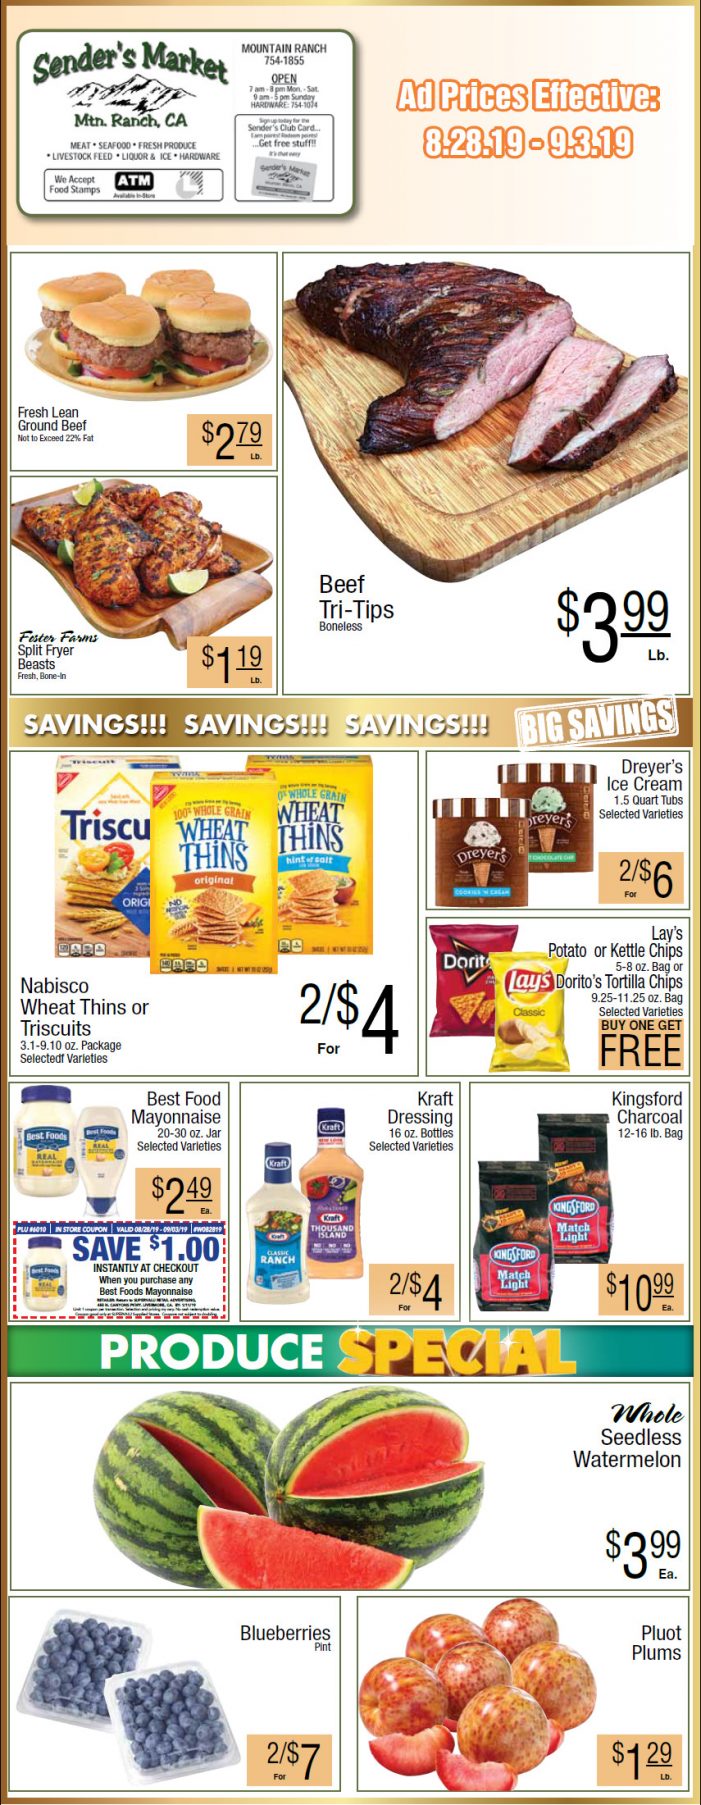 Sender’s Market Weekly Ad & Grocery Specials Through September 3rd